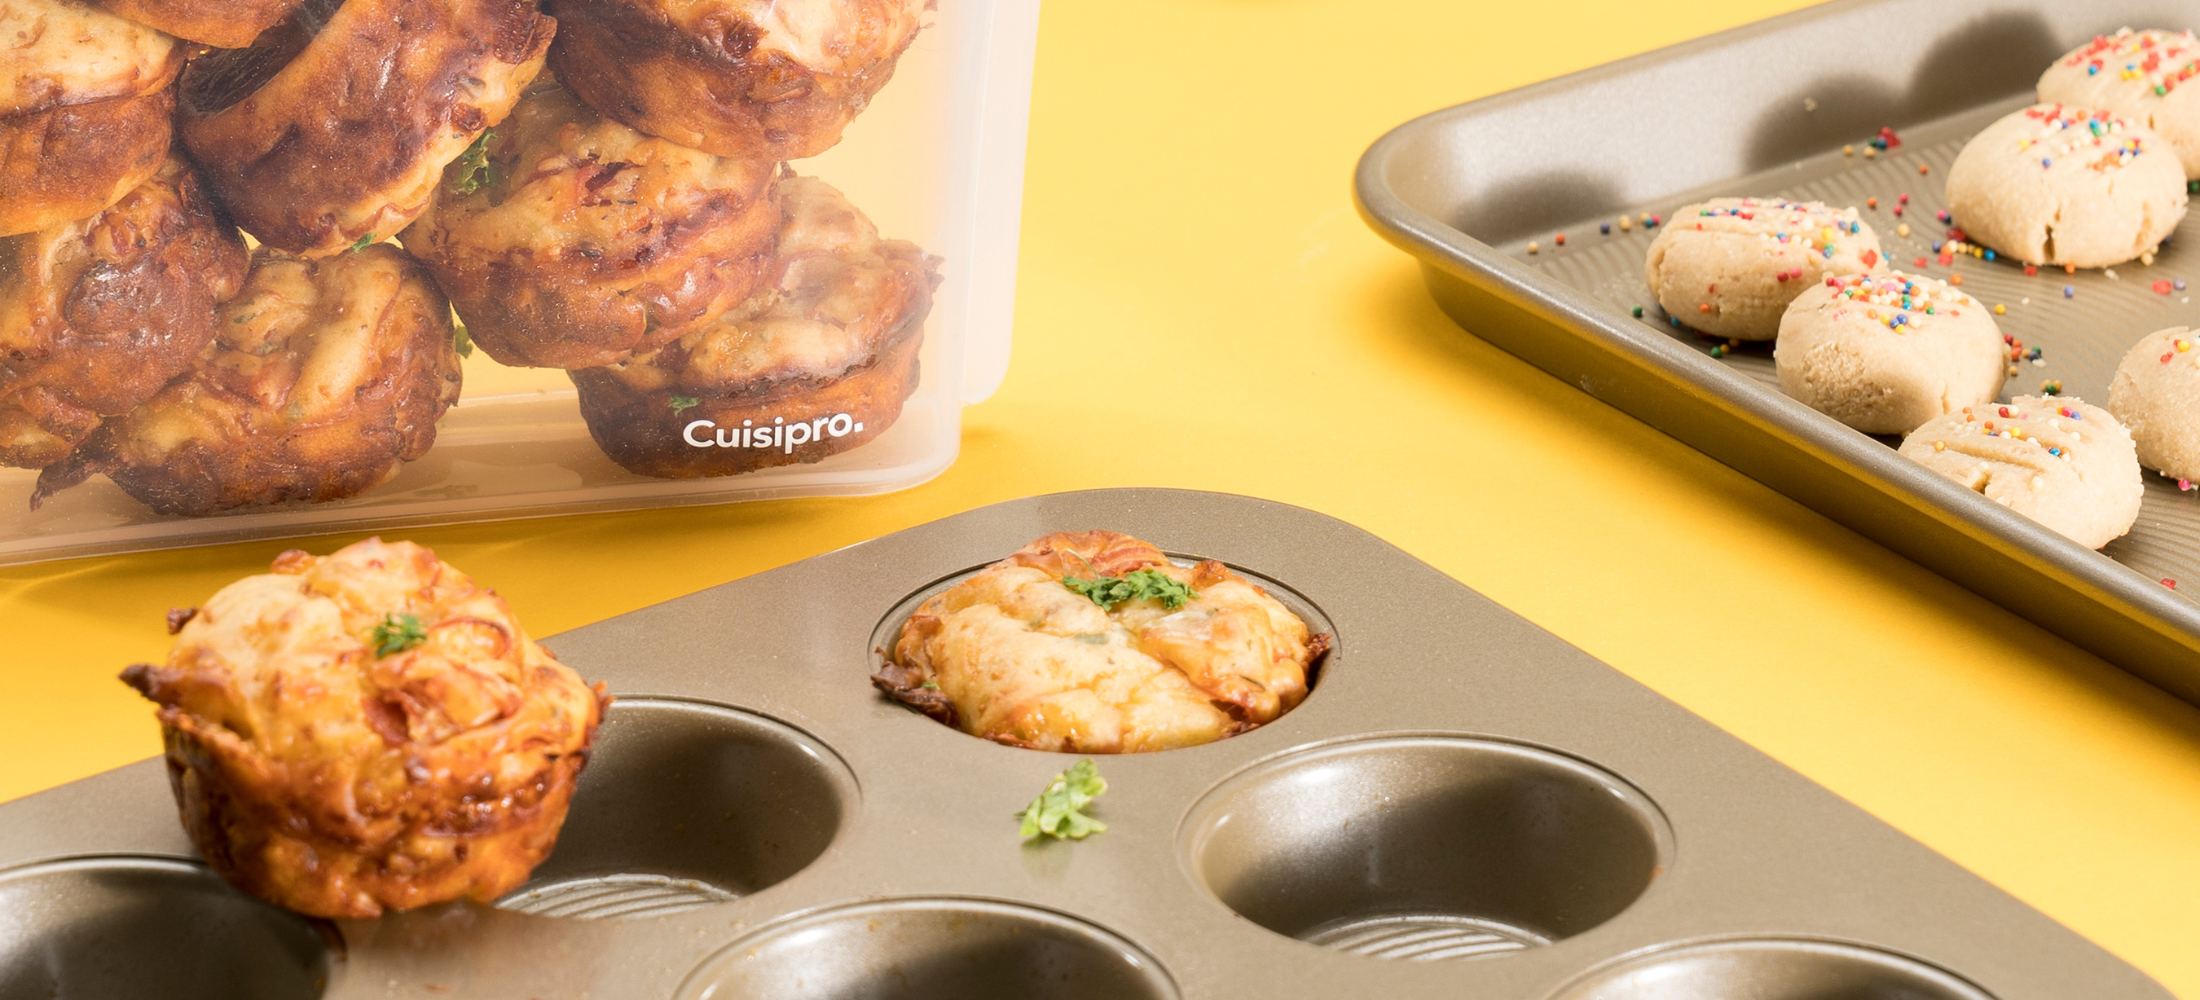 Cuisipro's kid friendly pizza muffin recipe. Showing cooked pizza muffin, in cuisipro muffin tin and extra in cuisipro reusable  bag.